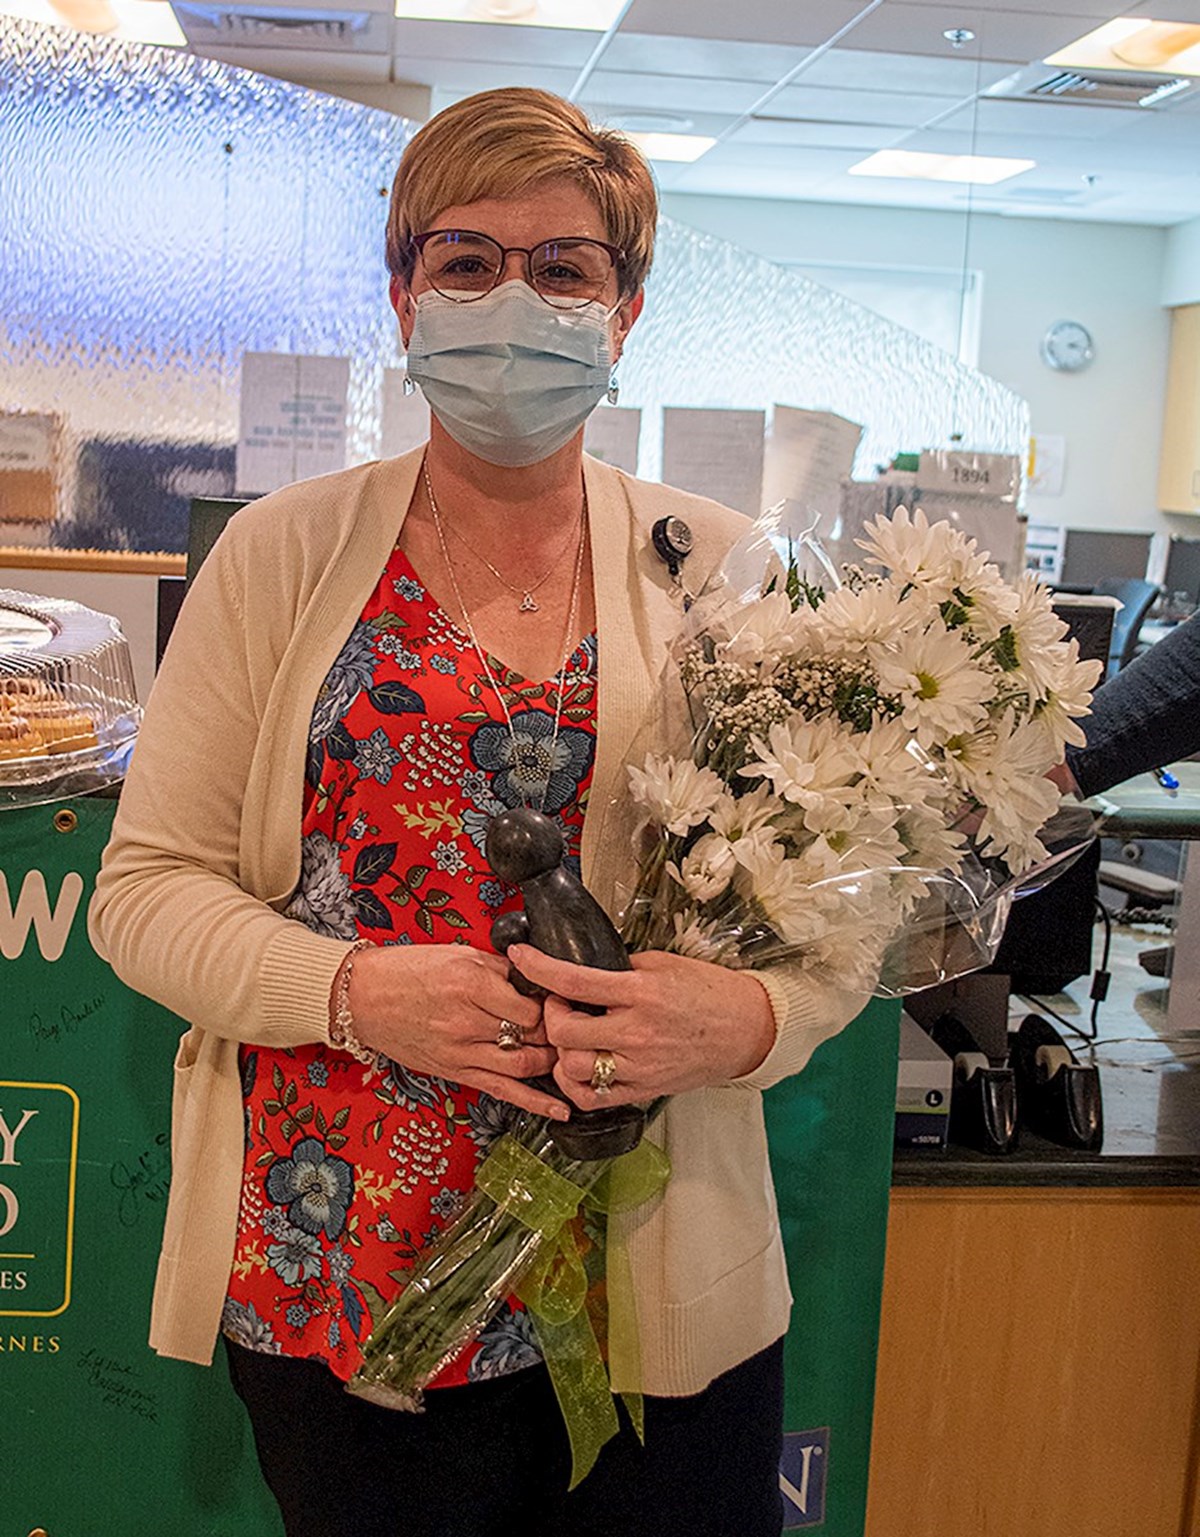 Christine Sarza, RN receives DAISY Award for exceptional care